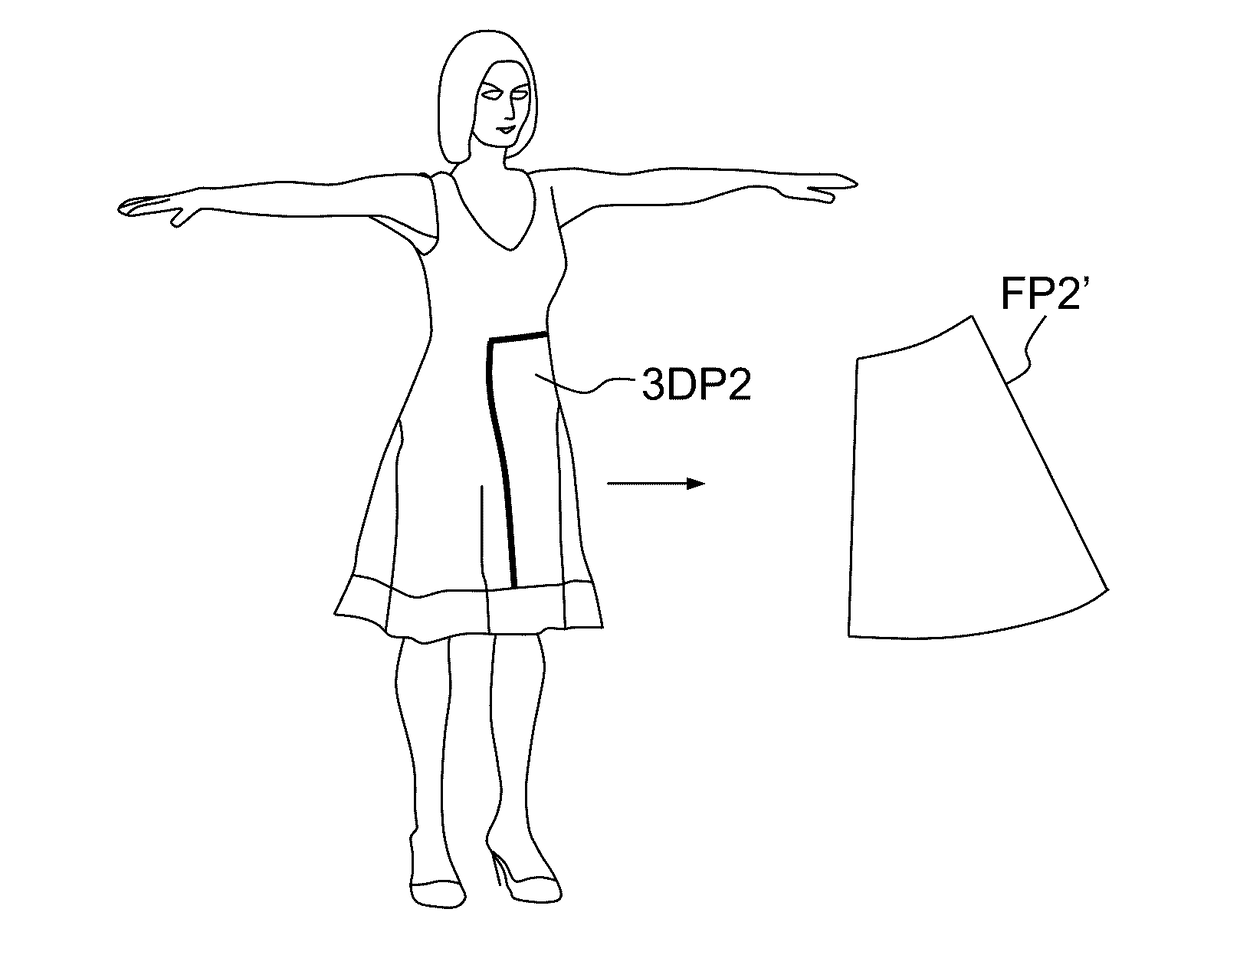 Computer-Implemented Method For Designing A Manufacturable Garment